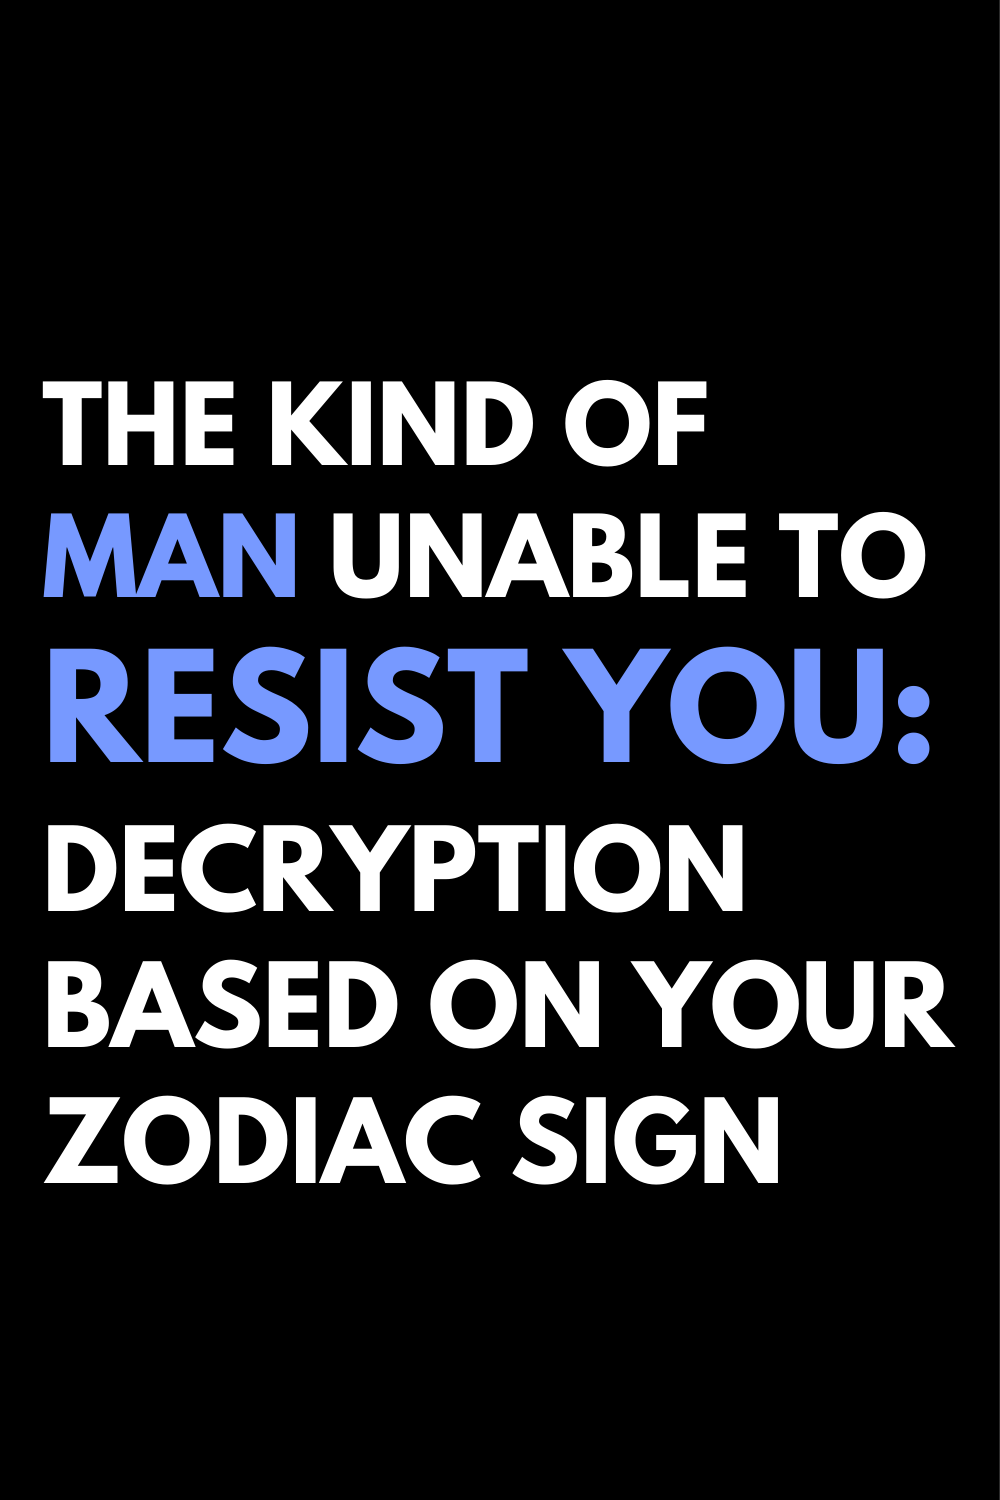 The Kind Of Man Unable To Resist You: Decryption Based On Your Zodiac Sign